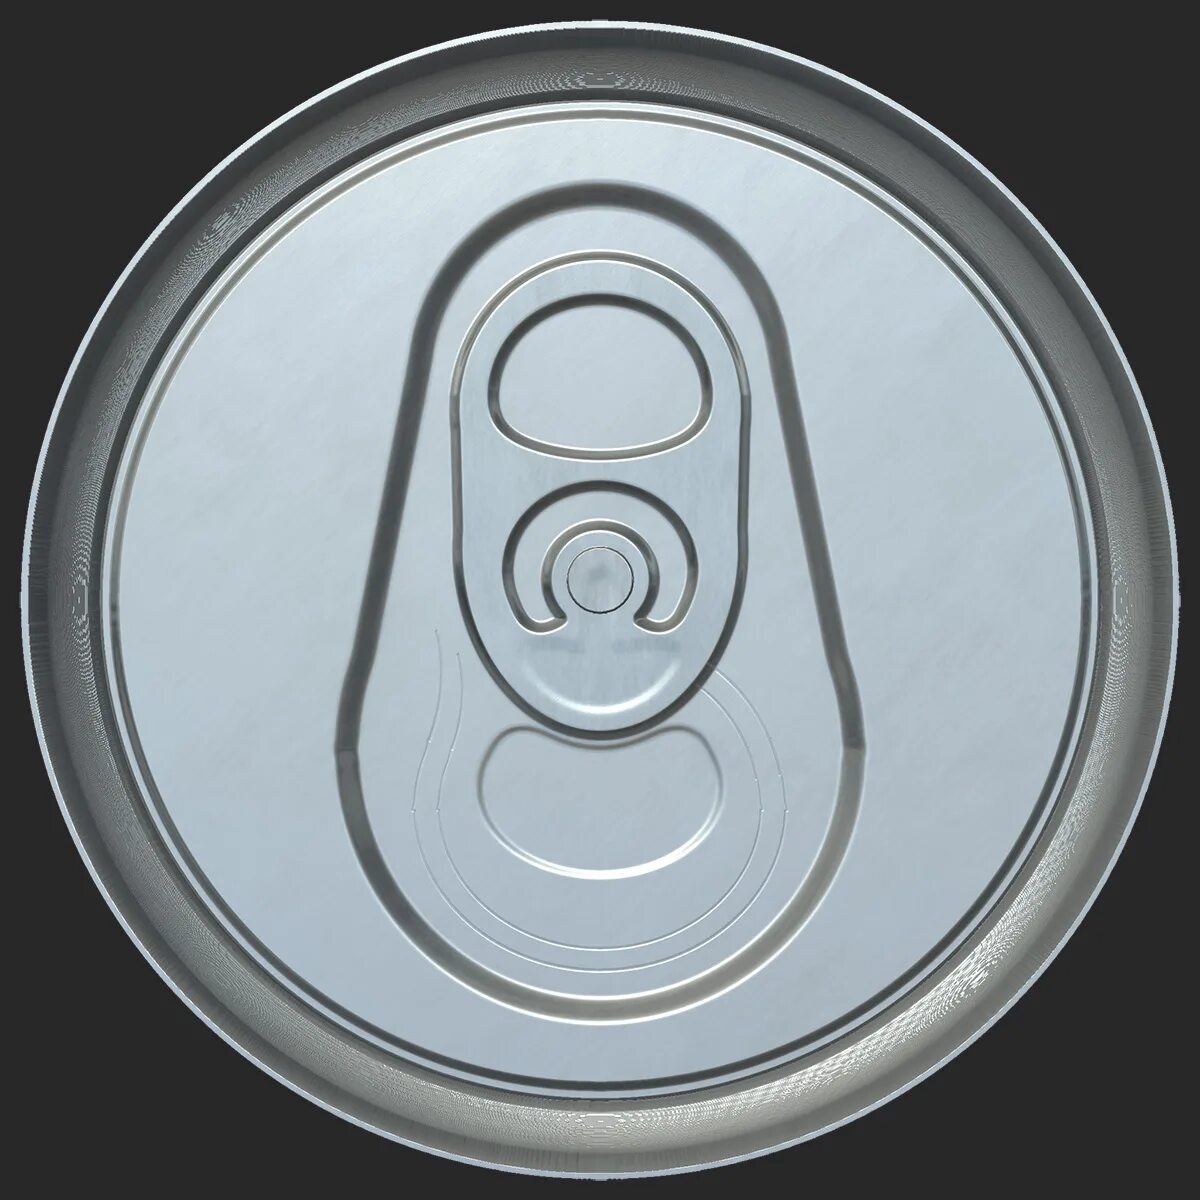 Https tripscan top. Soda can Top. Открывашки от банки колы текстура. Soda can texture. Soda can Tabs динозавр.